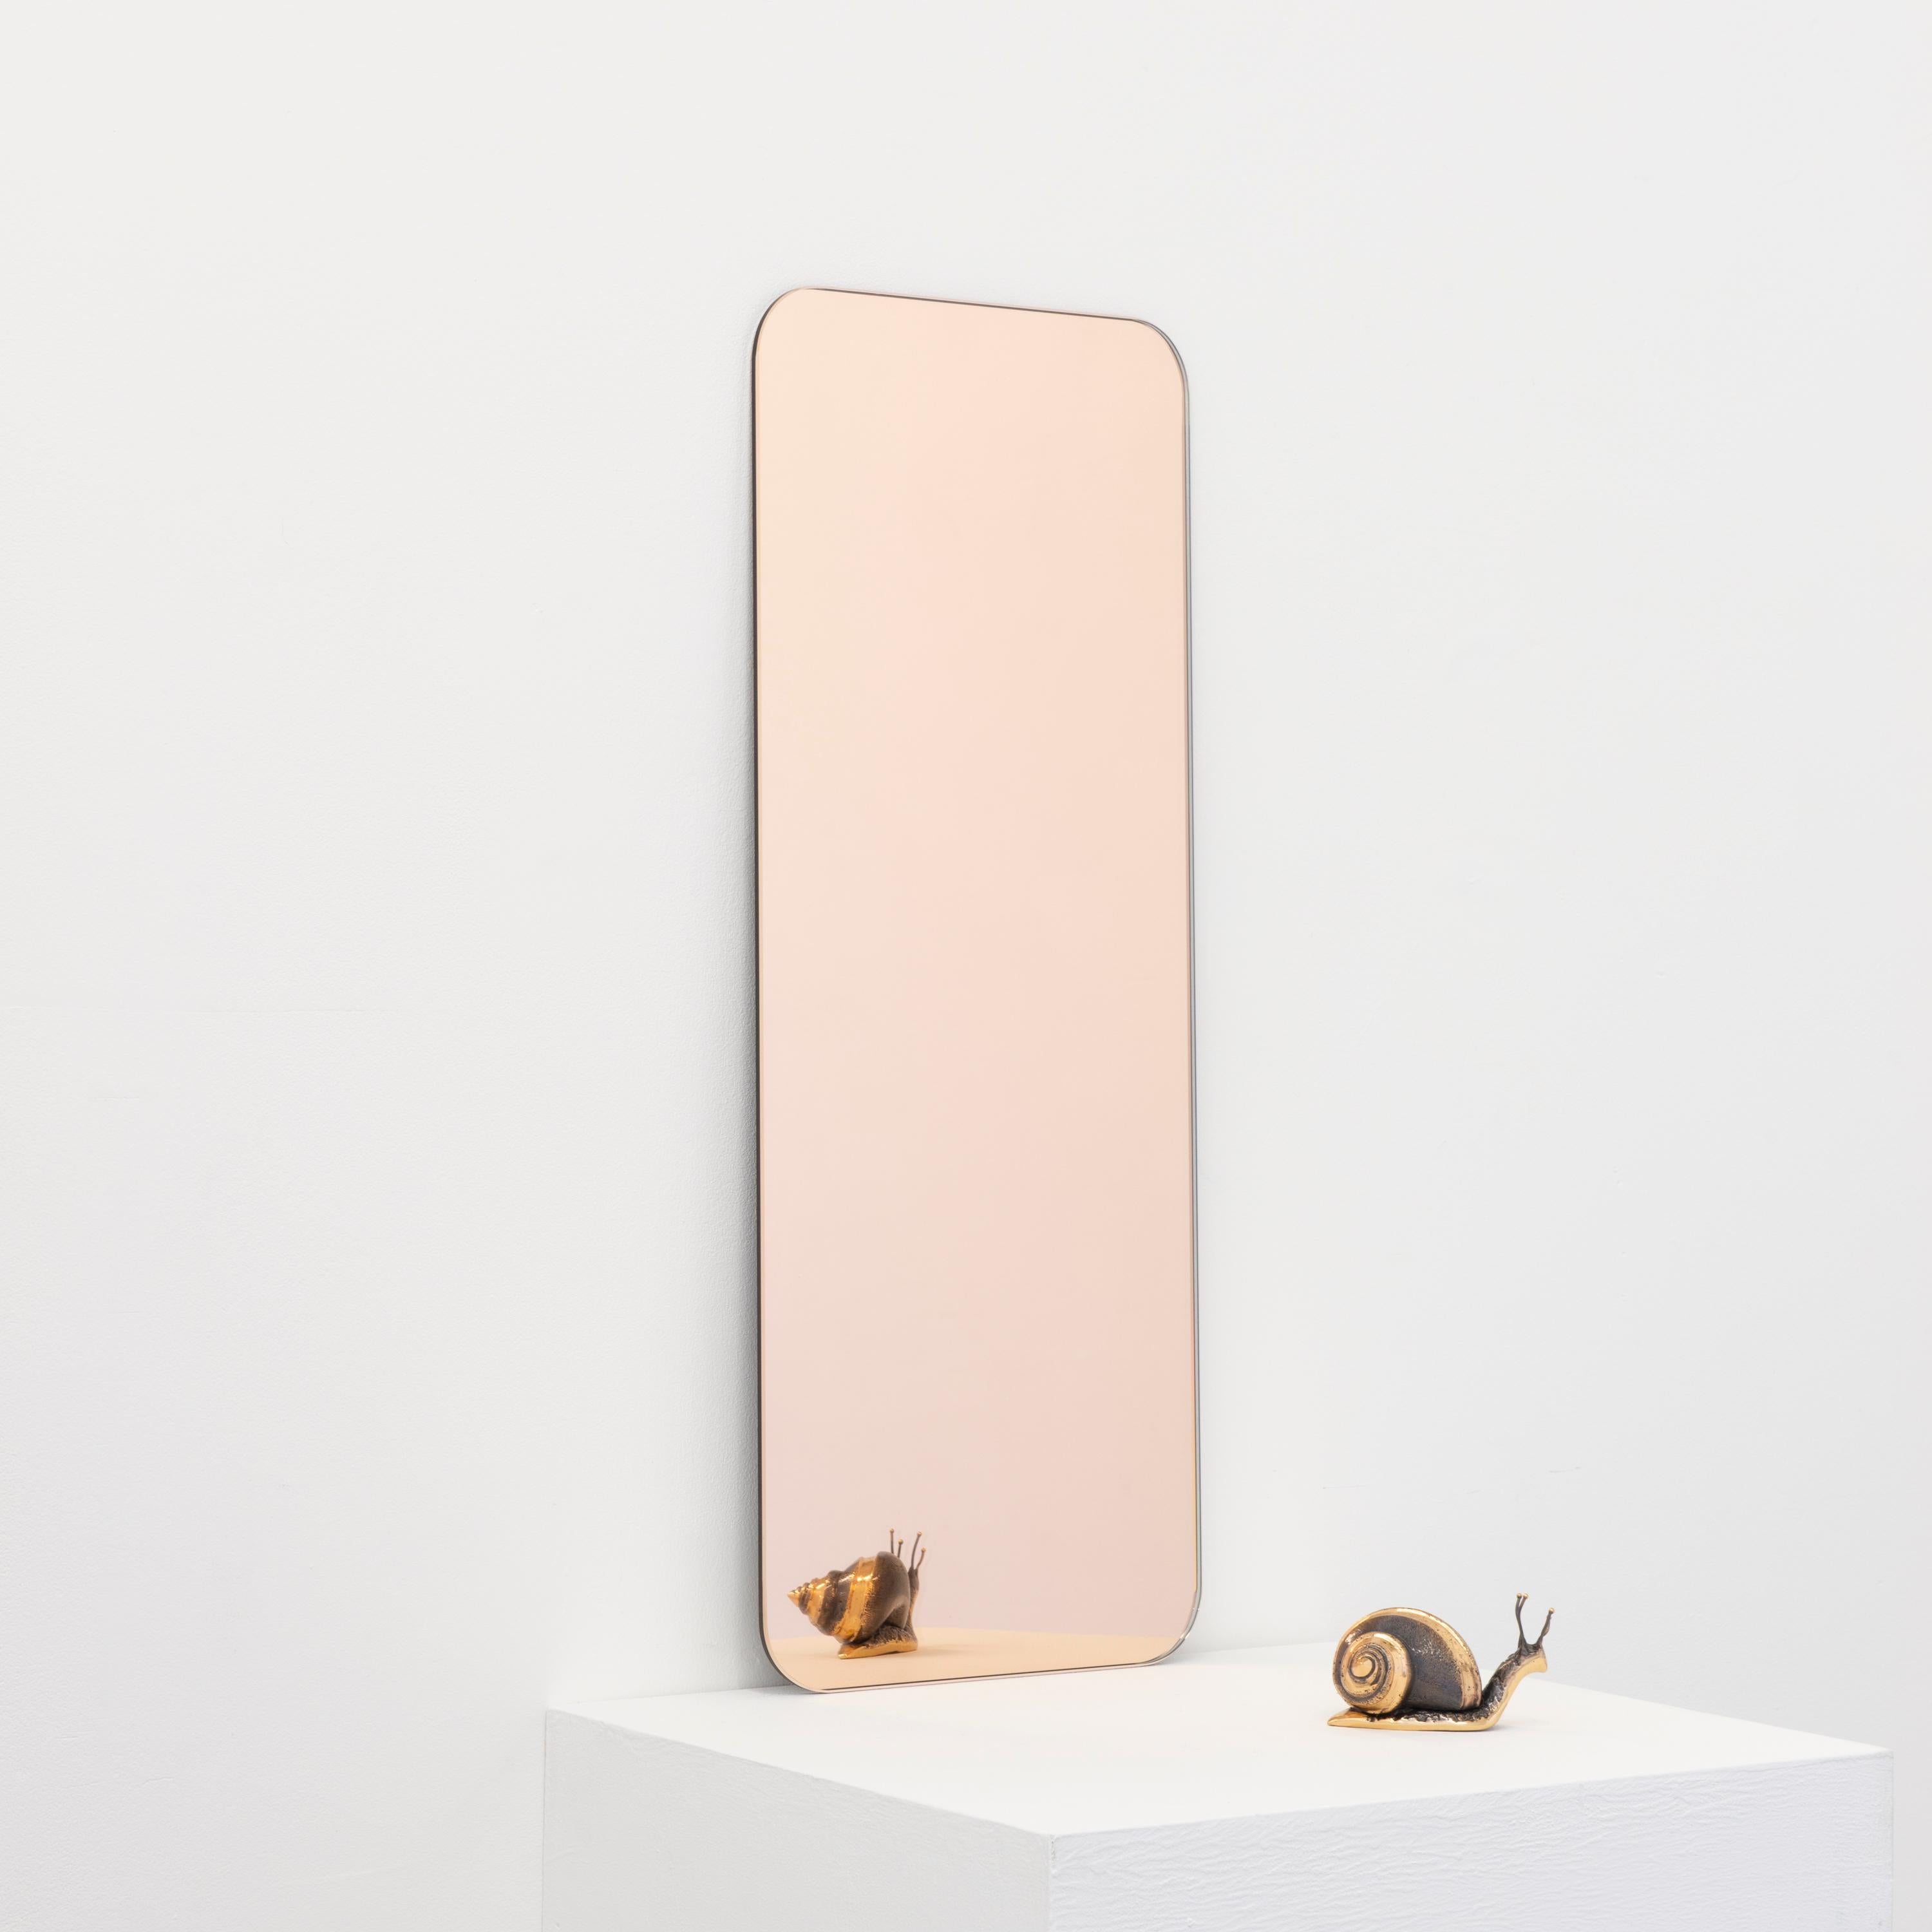 Quadris Rose Gold Rectangular Frameless Contemporary Mirror, Small In New Condition For Sale In London, GB